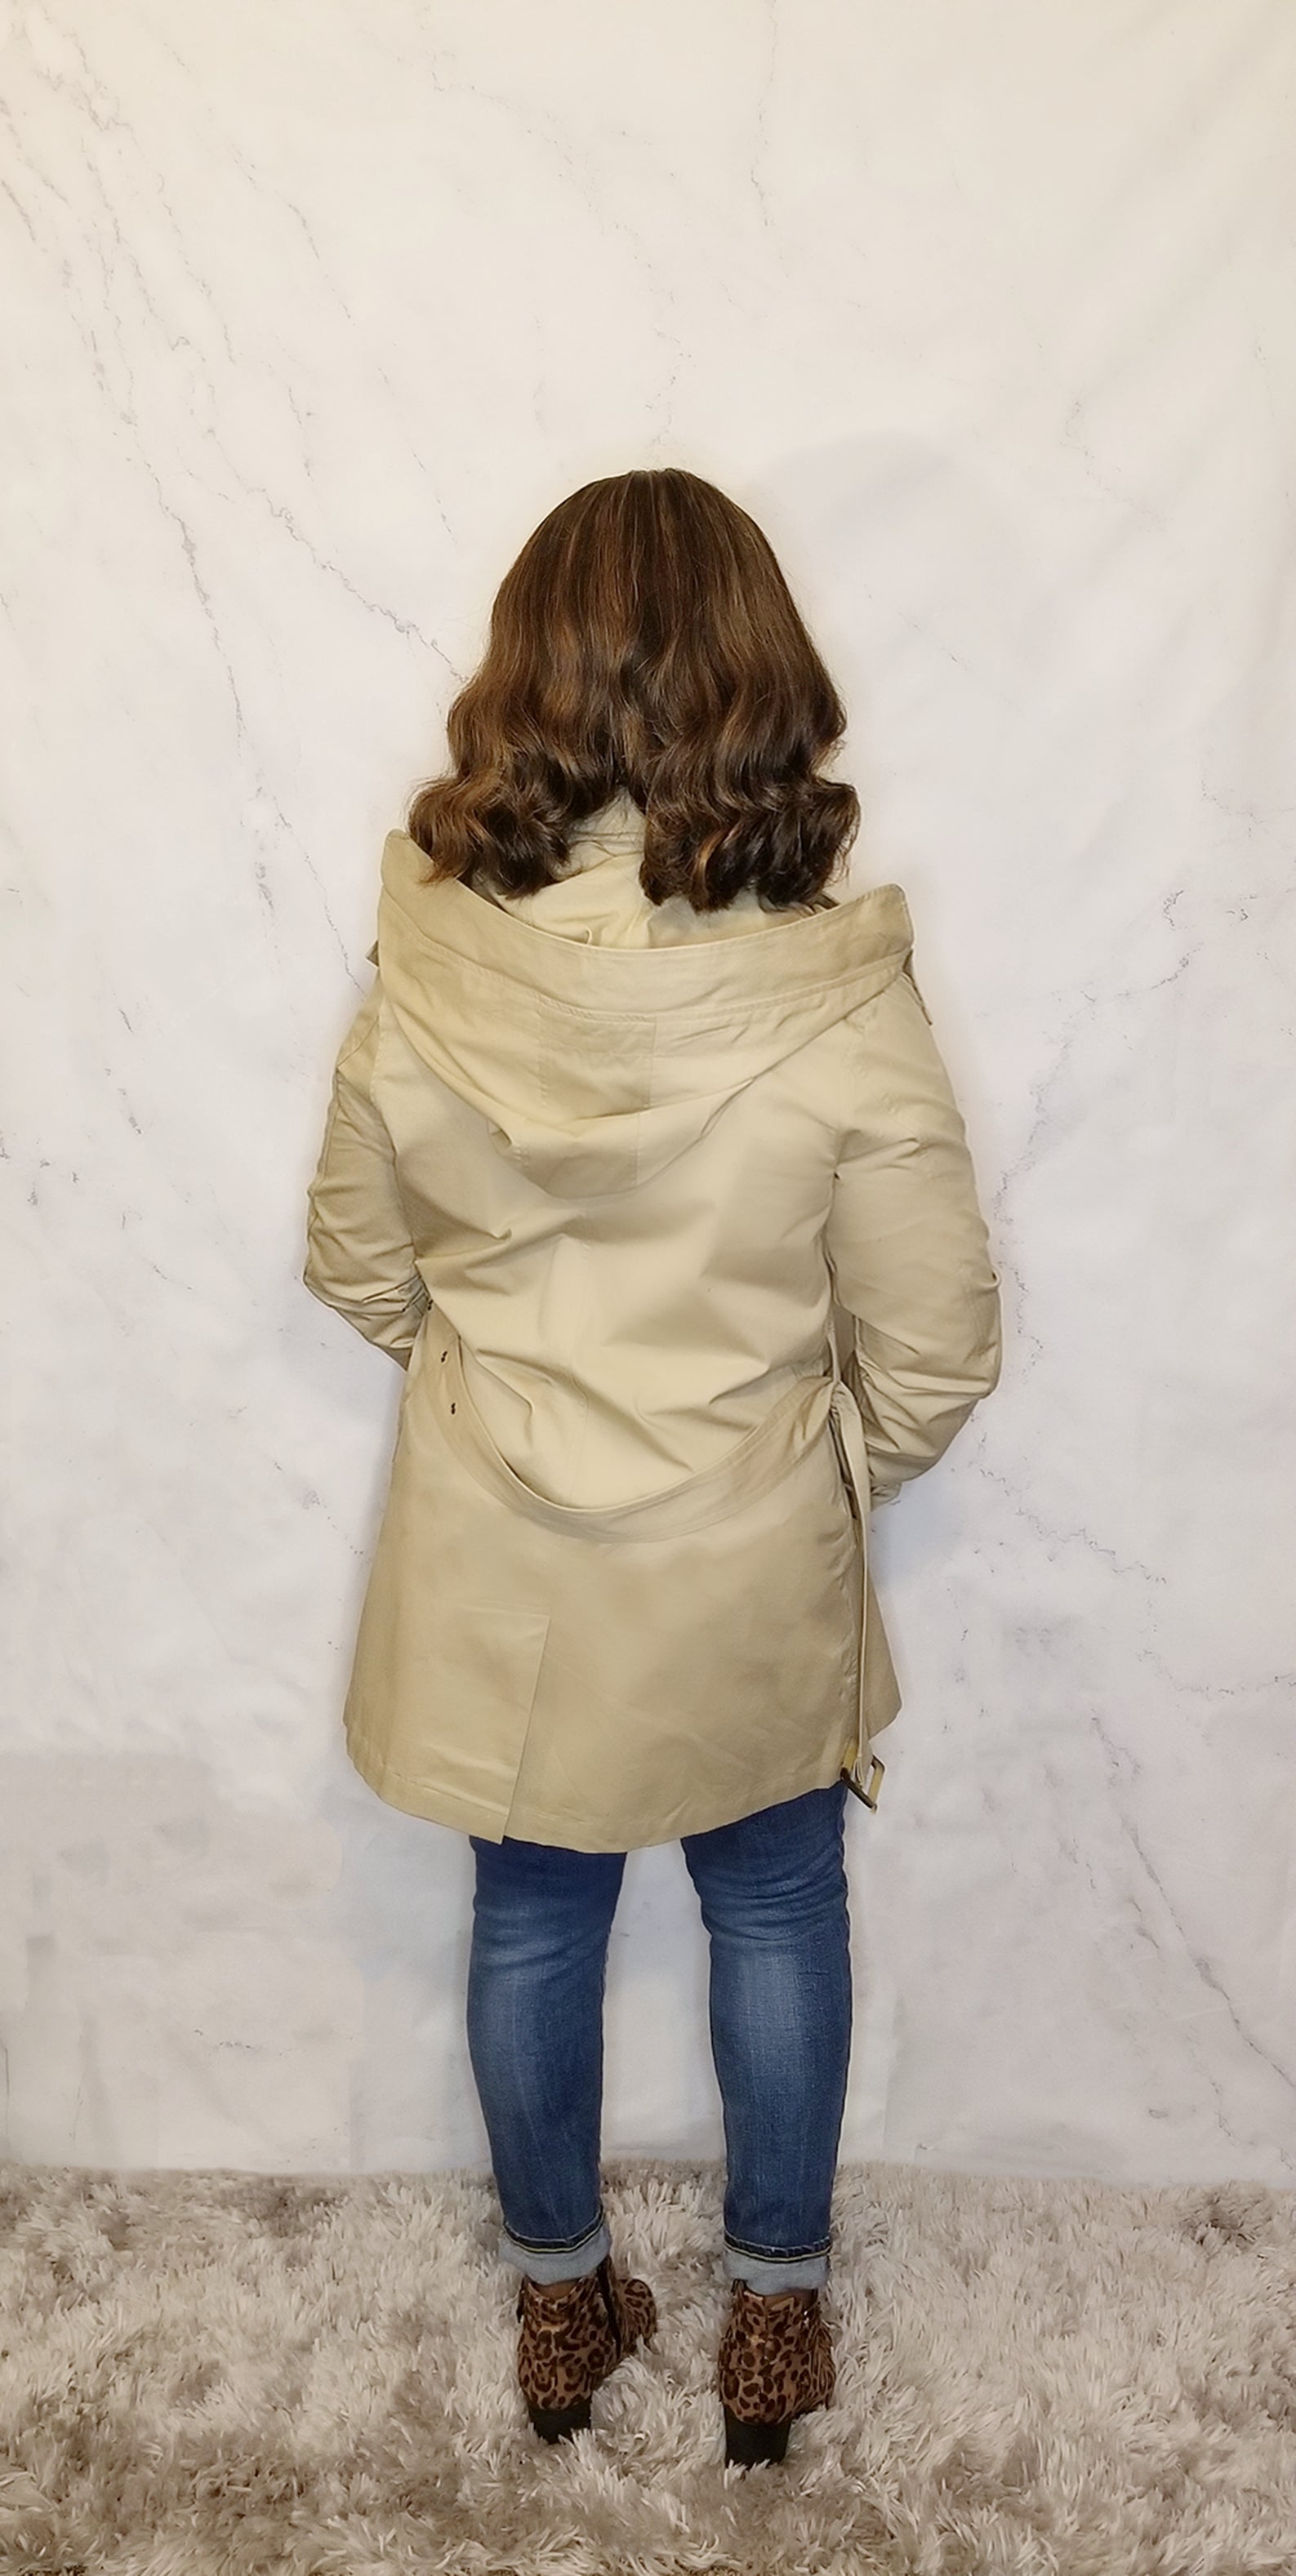 Double Breasted Trench Jacket